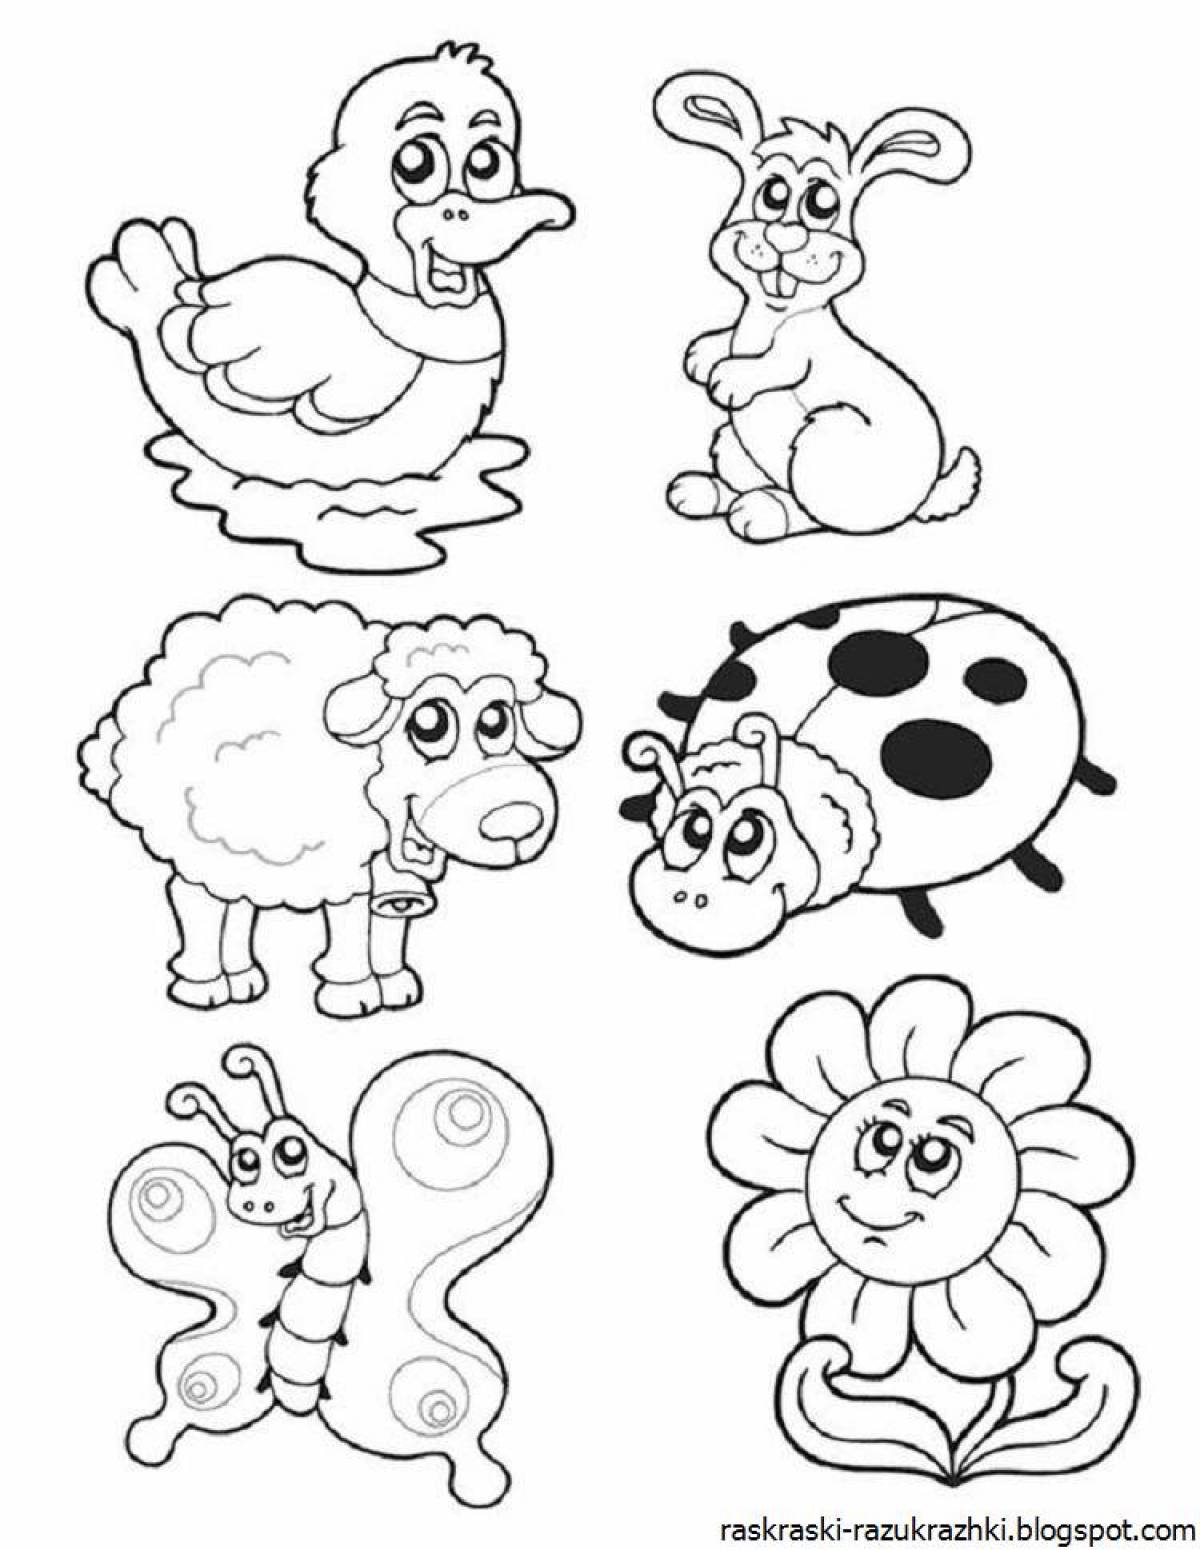 Colour coloring animals for children 5-6 years old